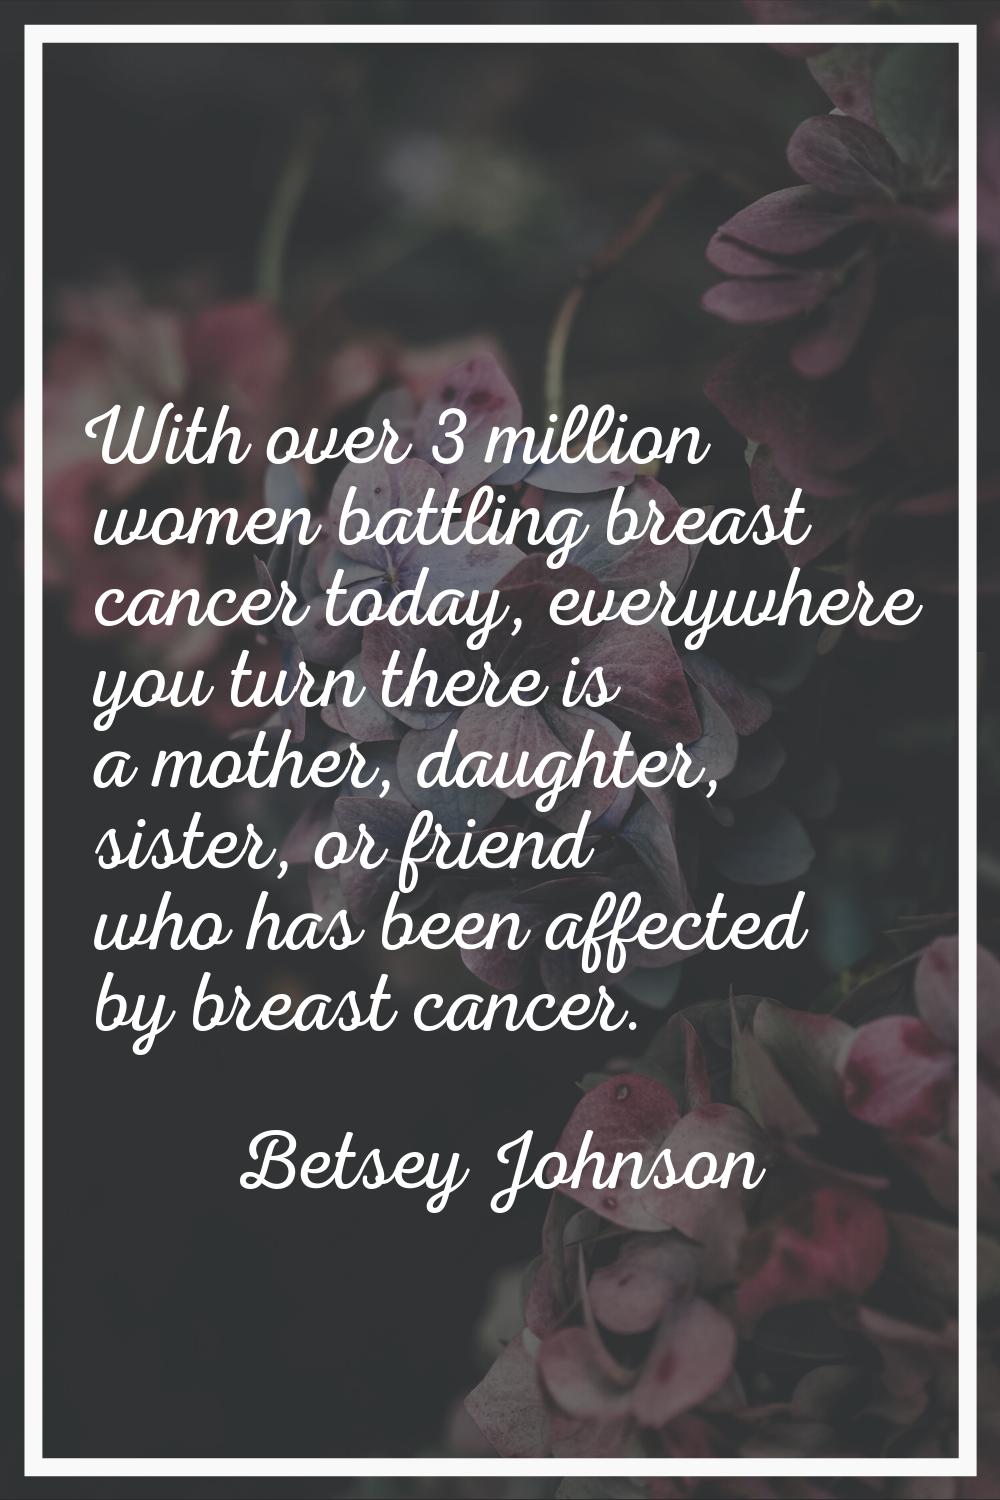 With over 3 million women battling breast cancer today, everywhere you turn there is a mother, daug